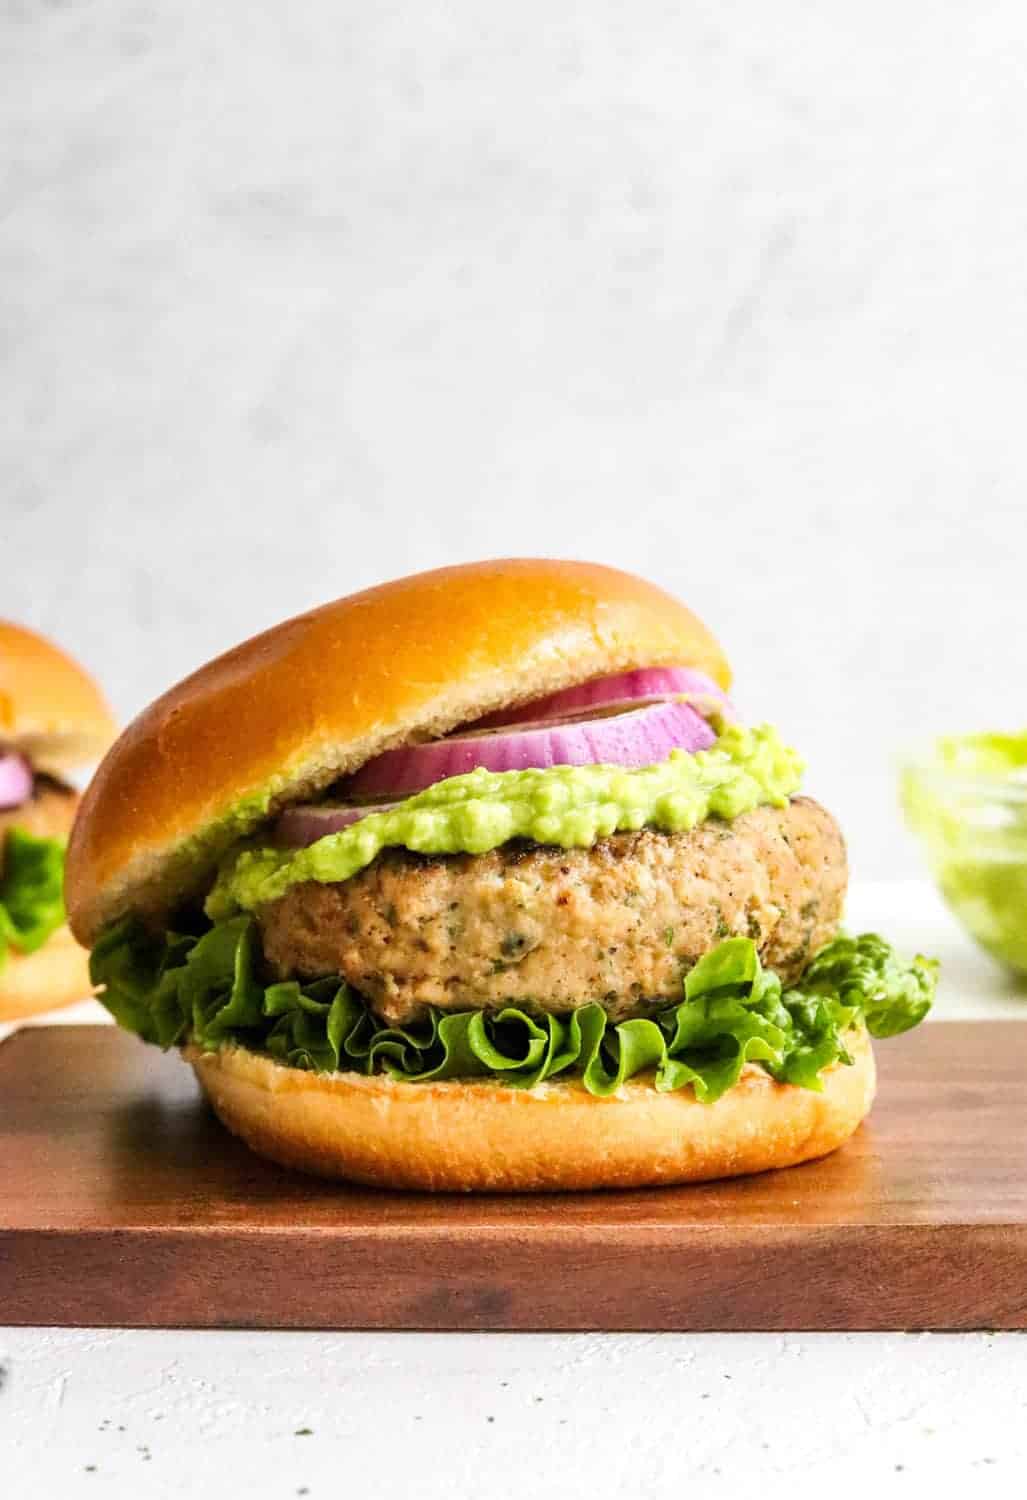 Healthy gluten free turkey burger in between a burger bun with purple onion and mashed avocado on it with another burger behind it. 